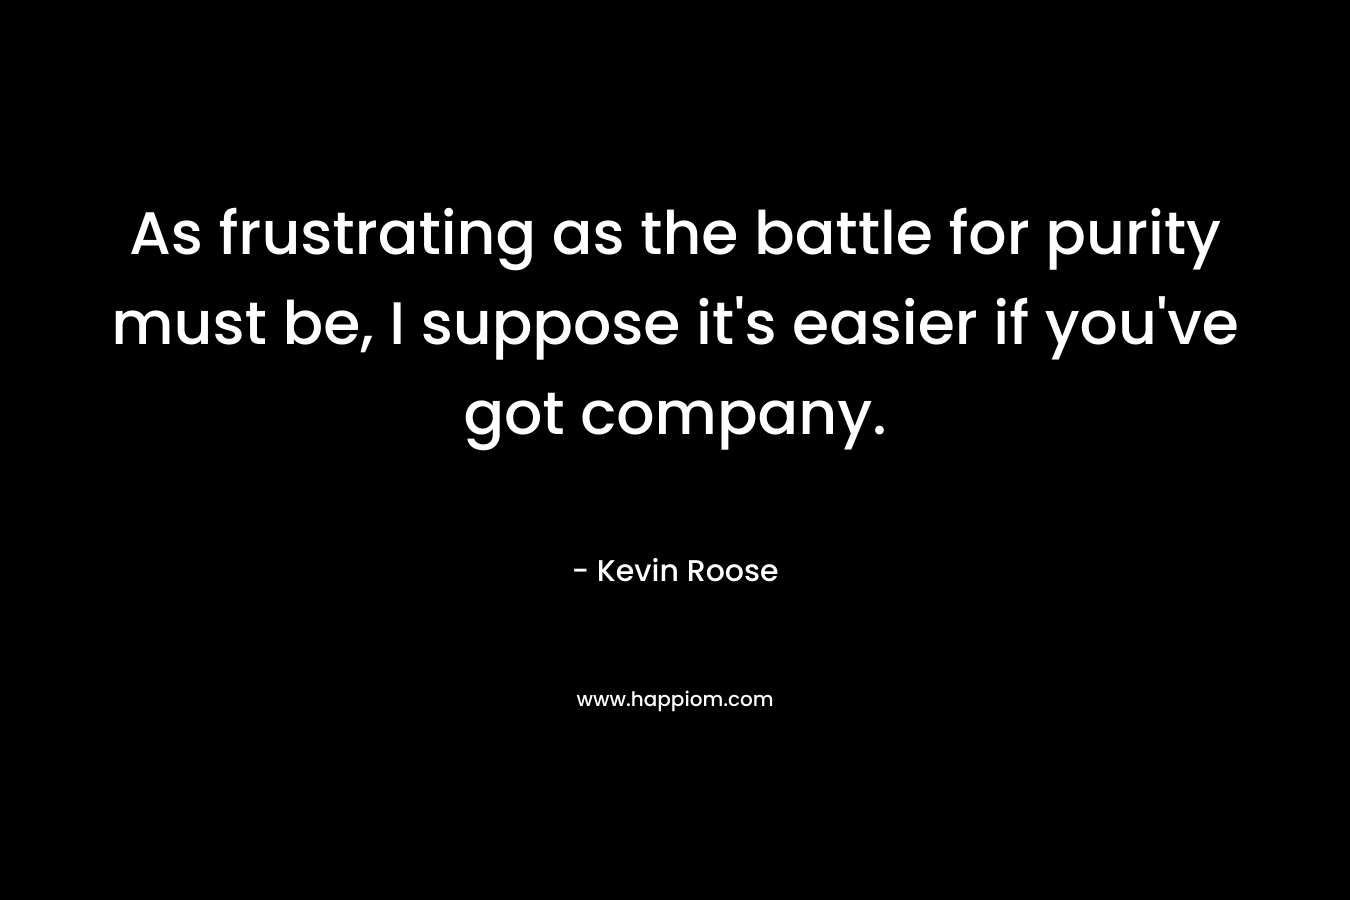 As frustrating as the battle for purity must be, I suppose it’s easier if you’ve got company. – Kevin Roose